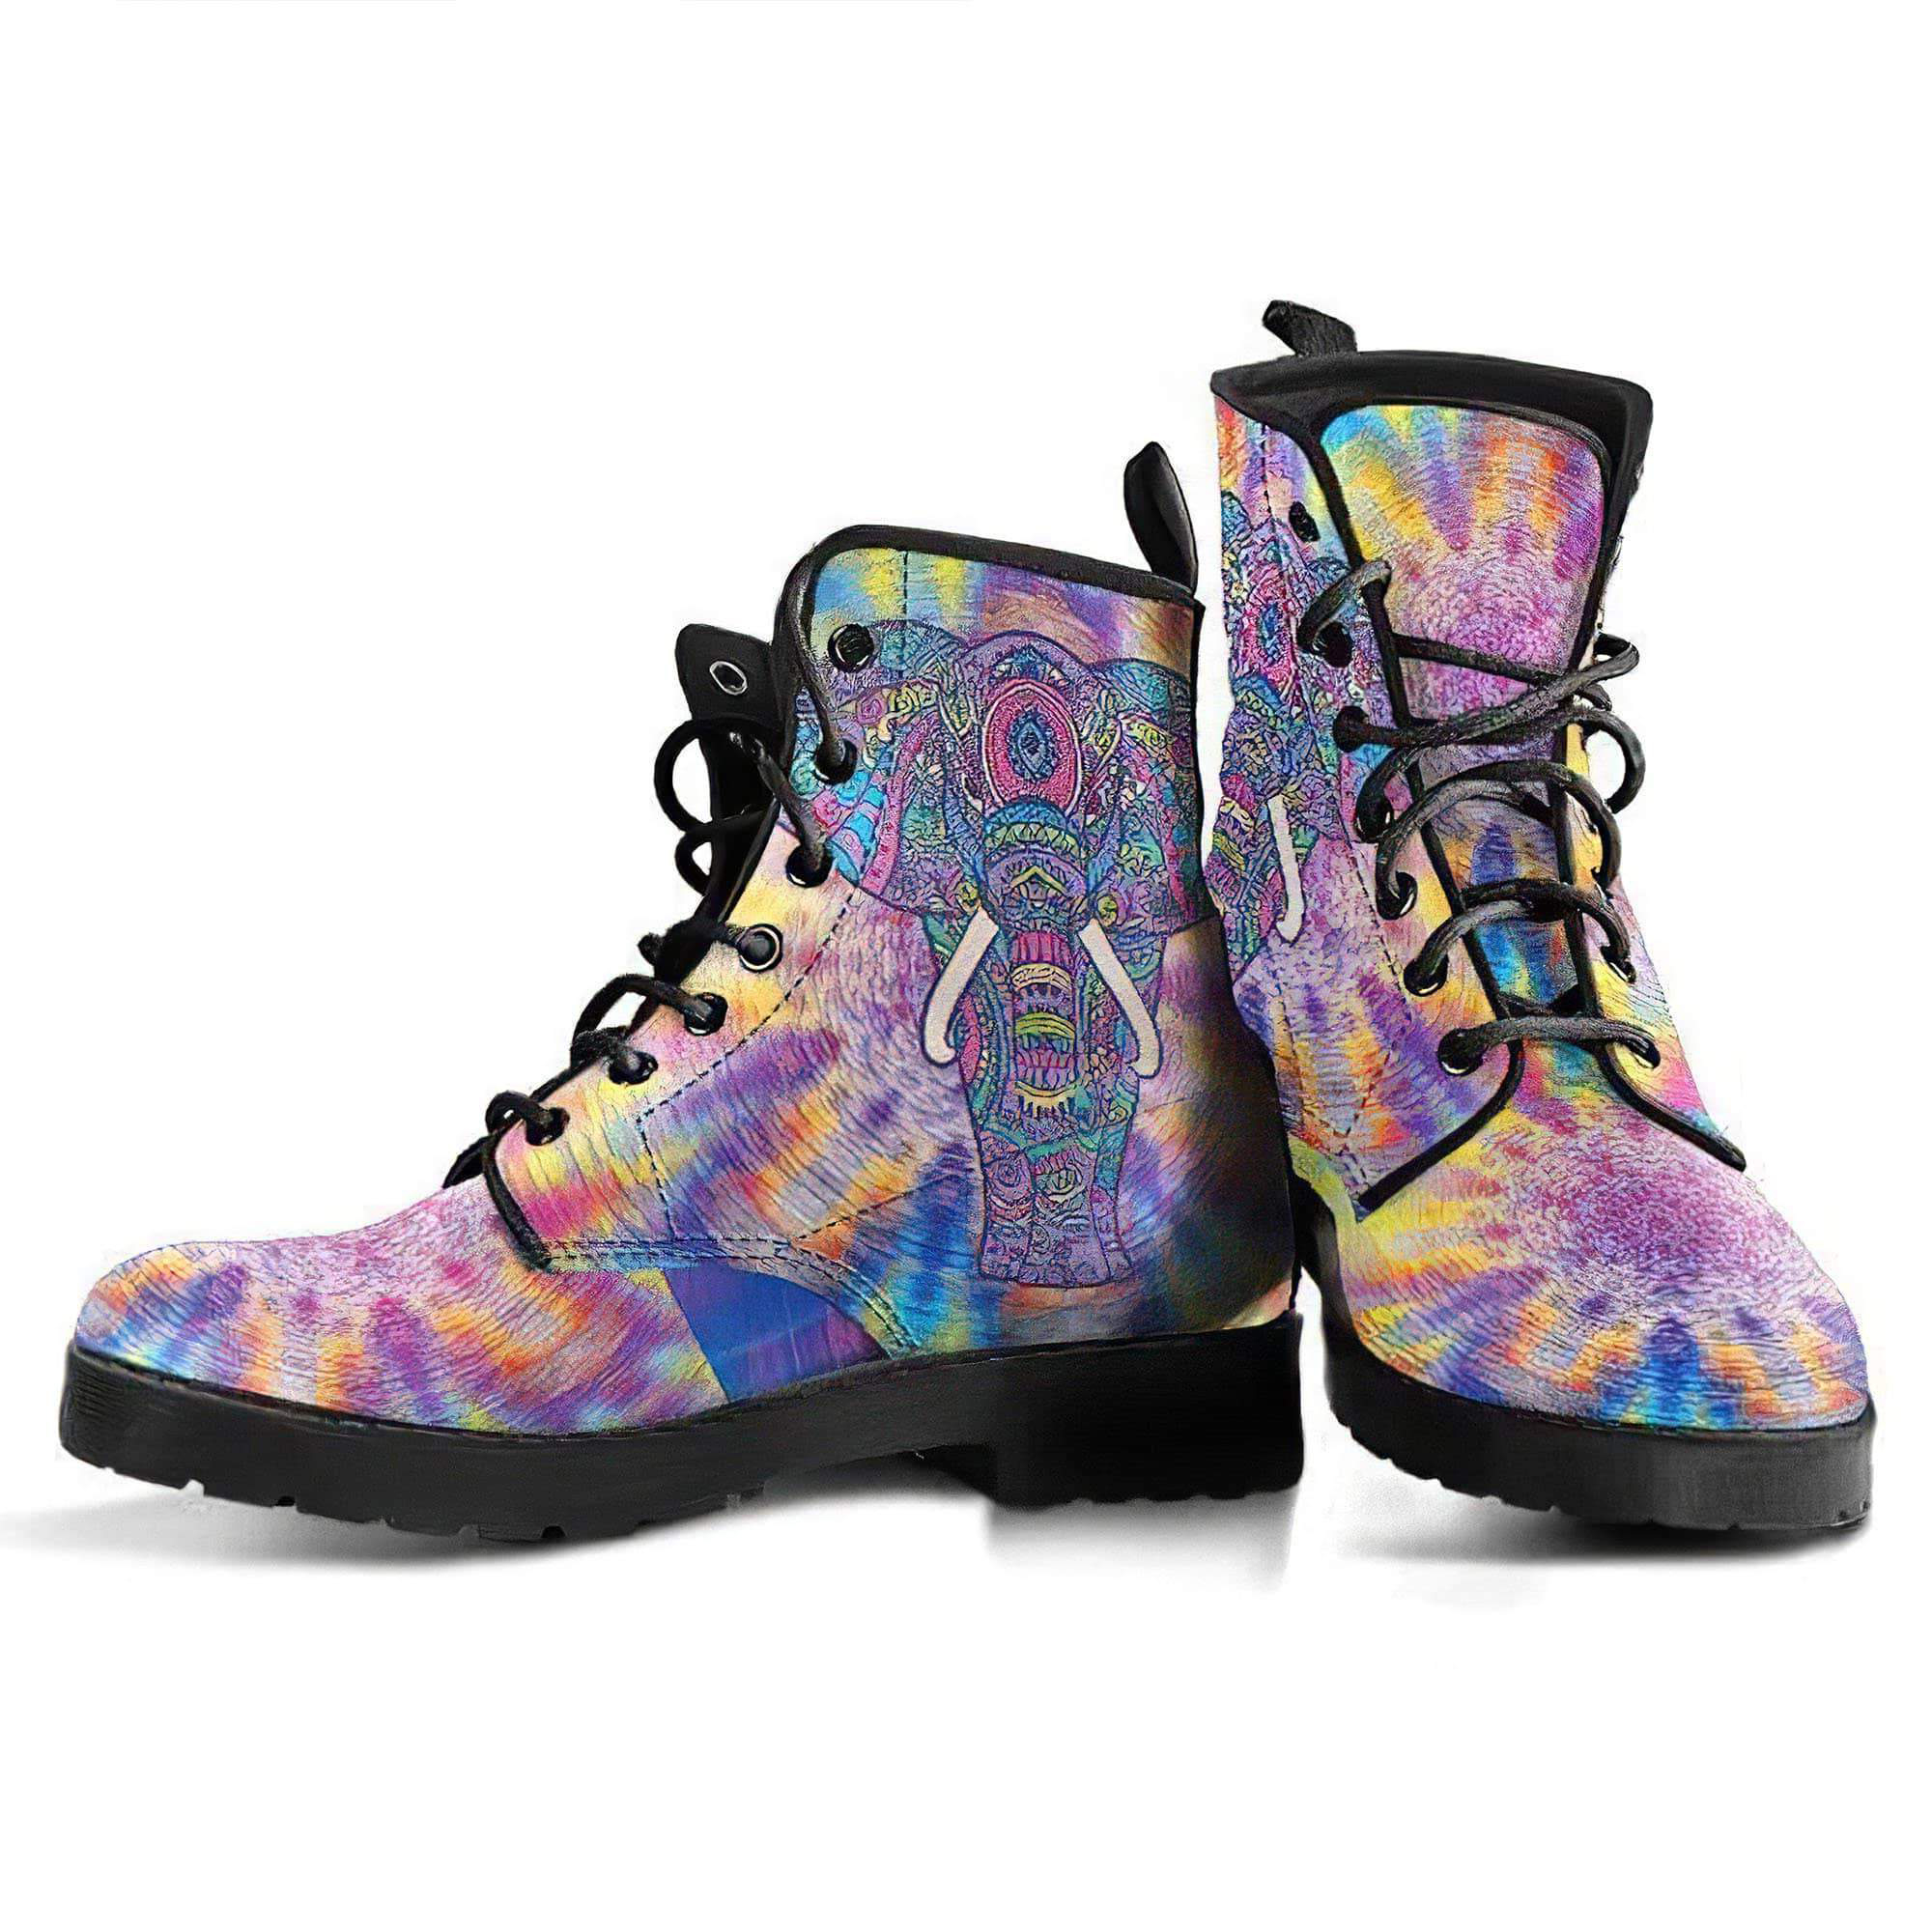 psychedelic-elephant-women-s-leather-boots-women-s-leather-boots-12051932217405.jpg